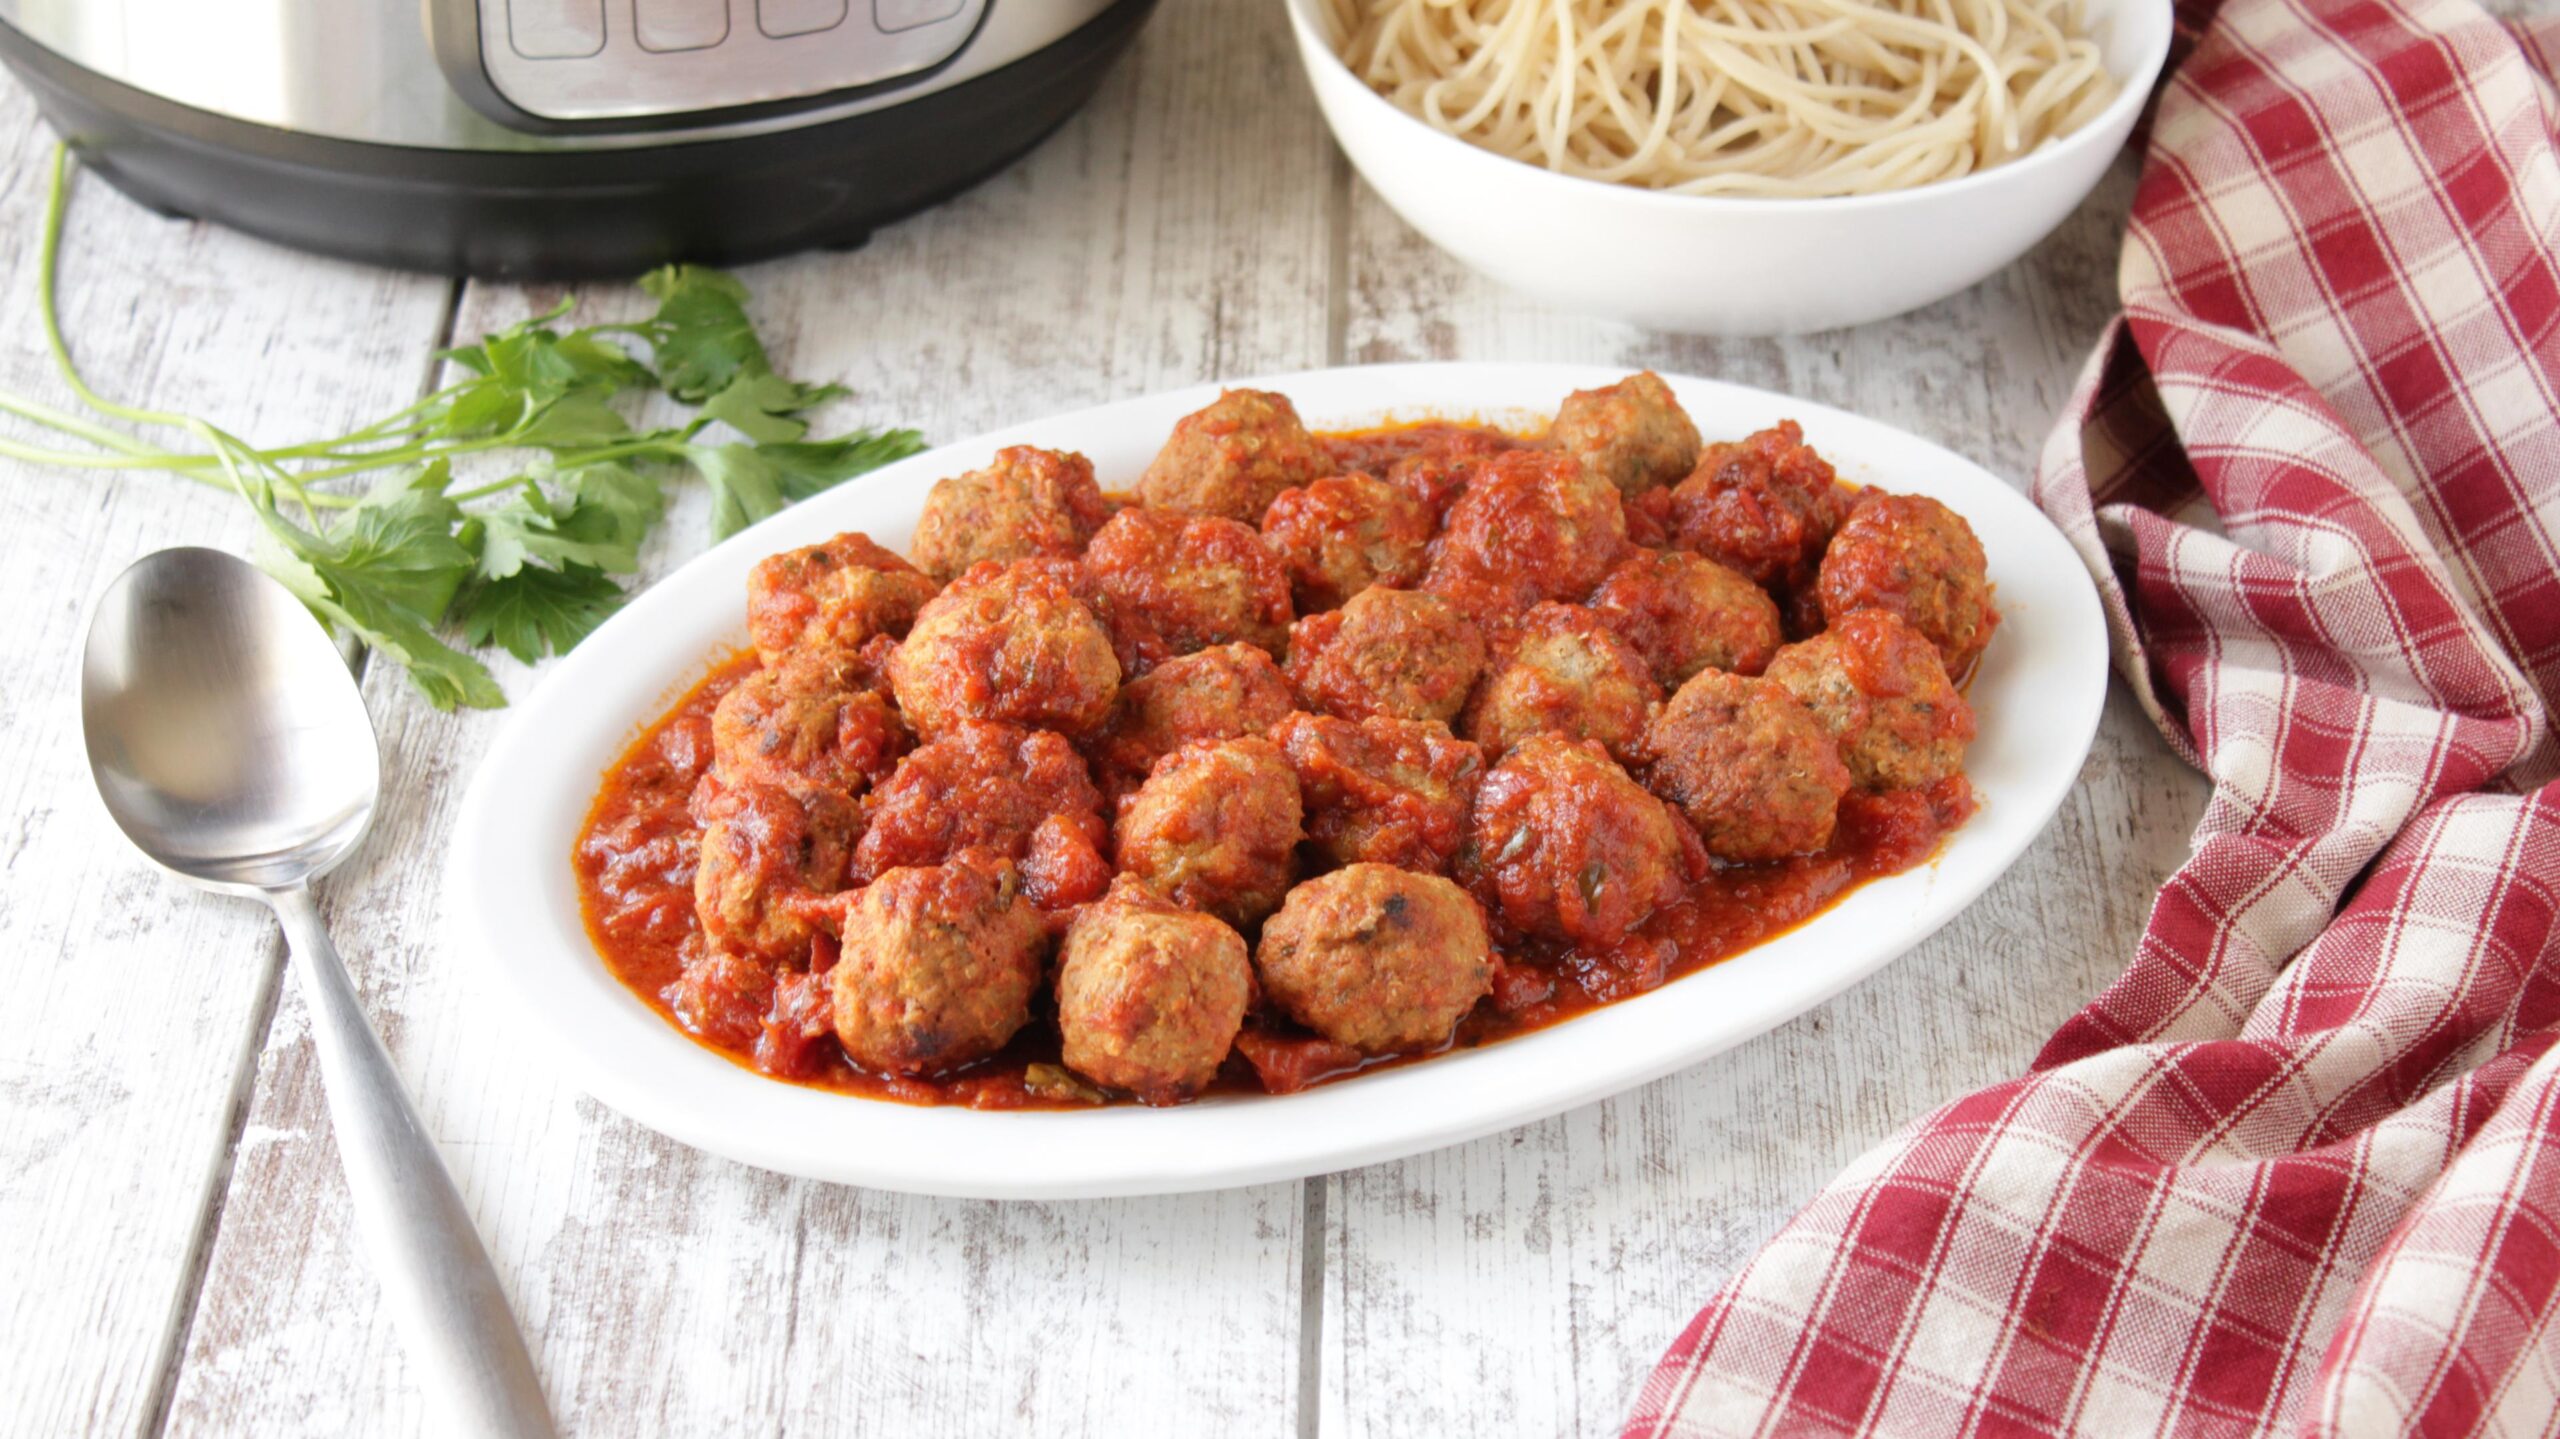  Juicy Italian Meatballs made in minutes with the Instant Pot!